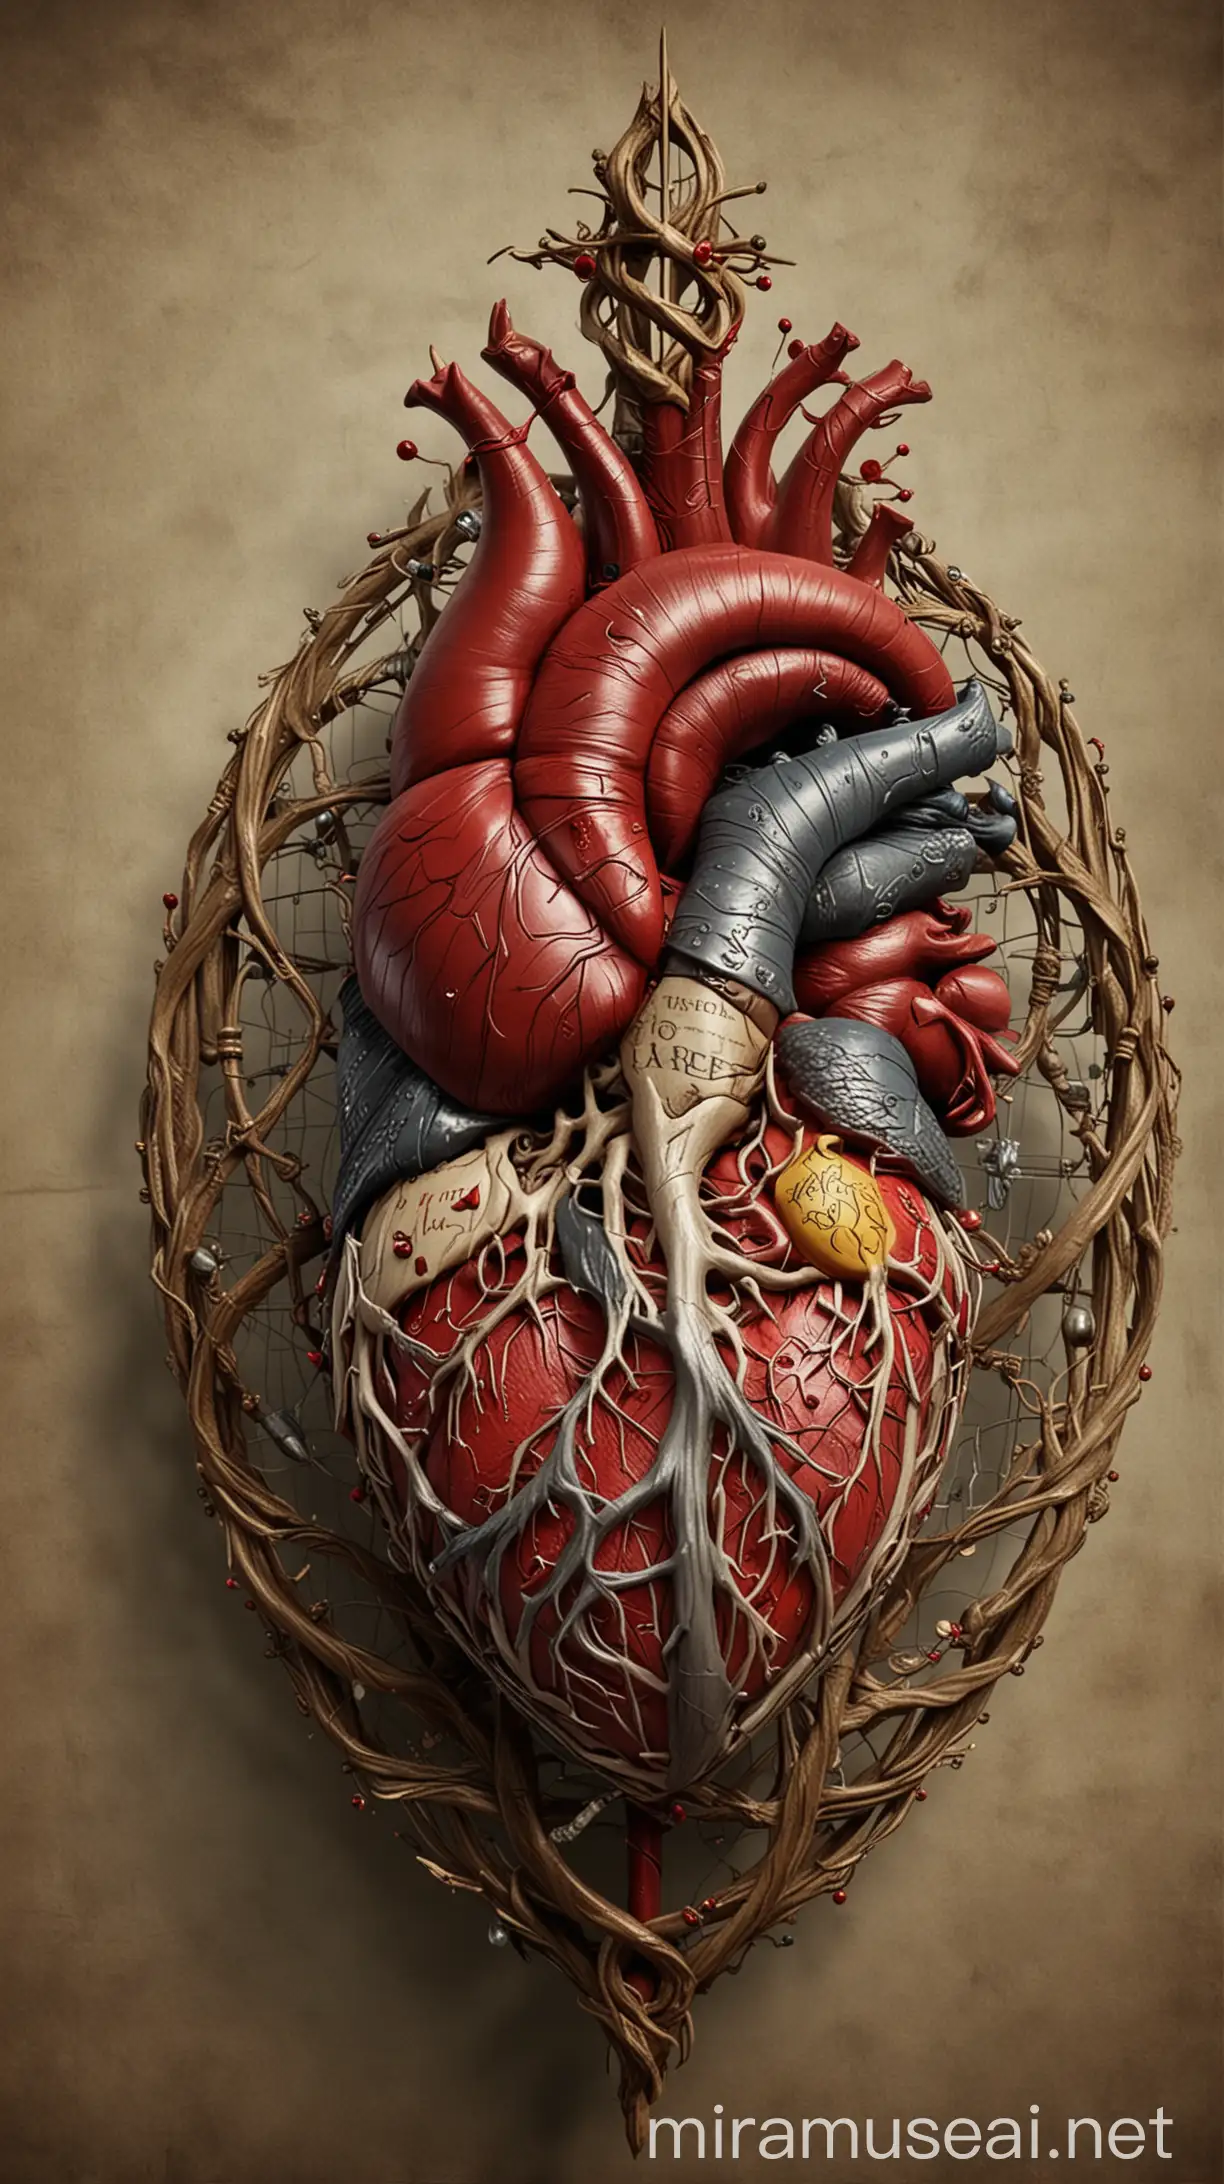 human heart, DNA, medicine, harry potter personage, Game of Thrones decoration, House of the Dragon series